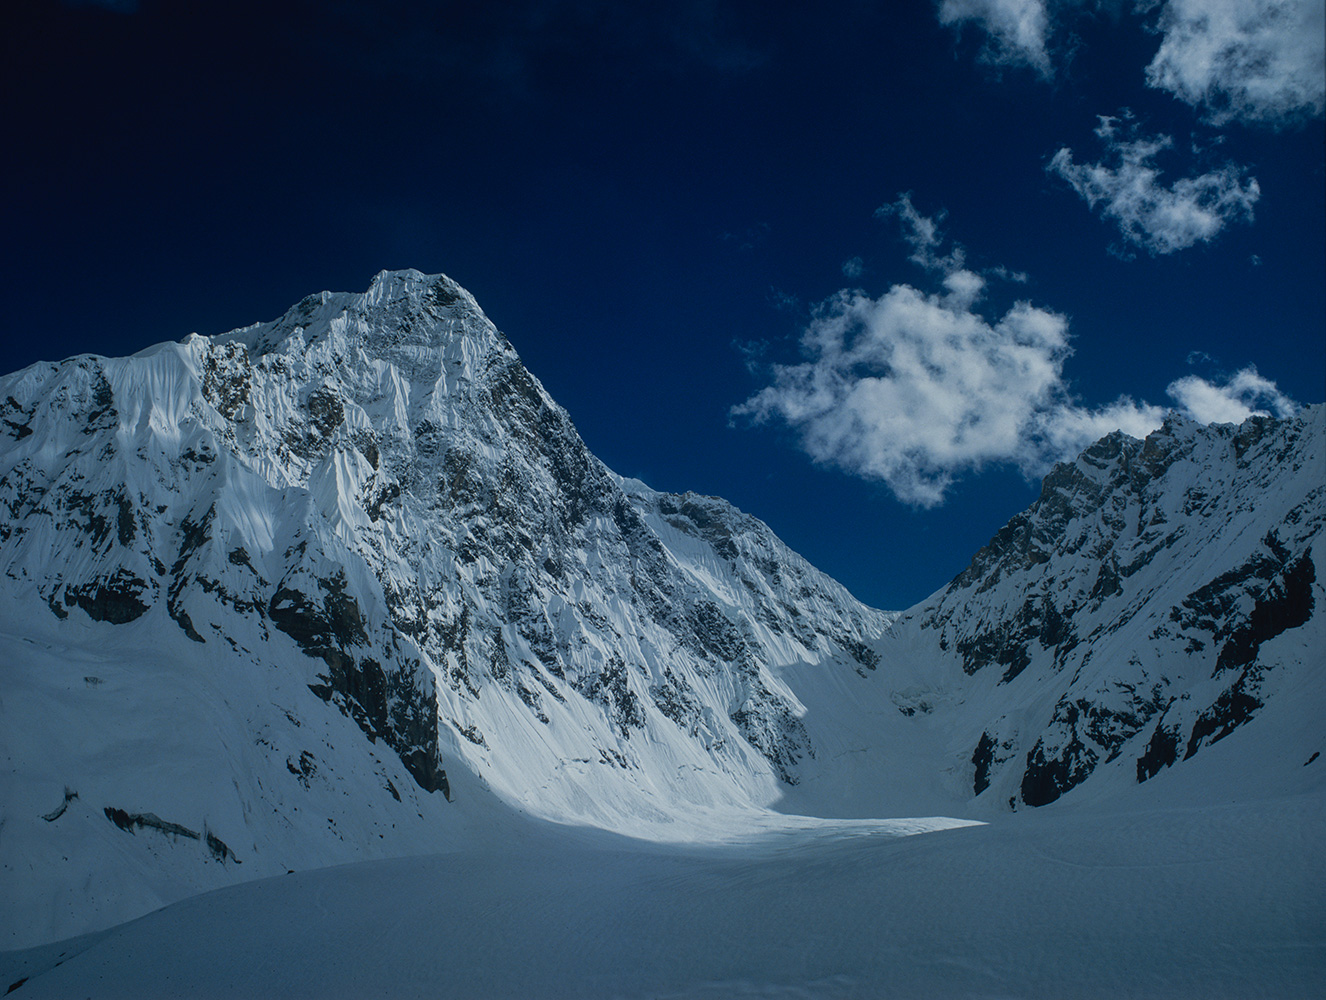 Mark Miller, Anwar Ali & I spent a month exploring some of the less visited corners of the glaciated valleys above Hushe in 1989, and we named this peak Gnasherbrum...